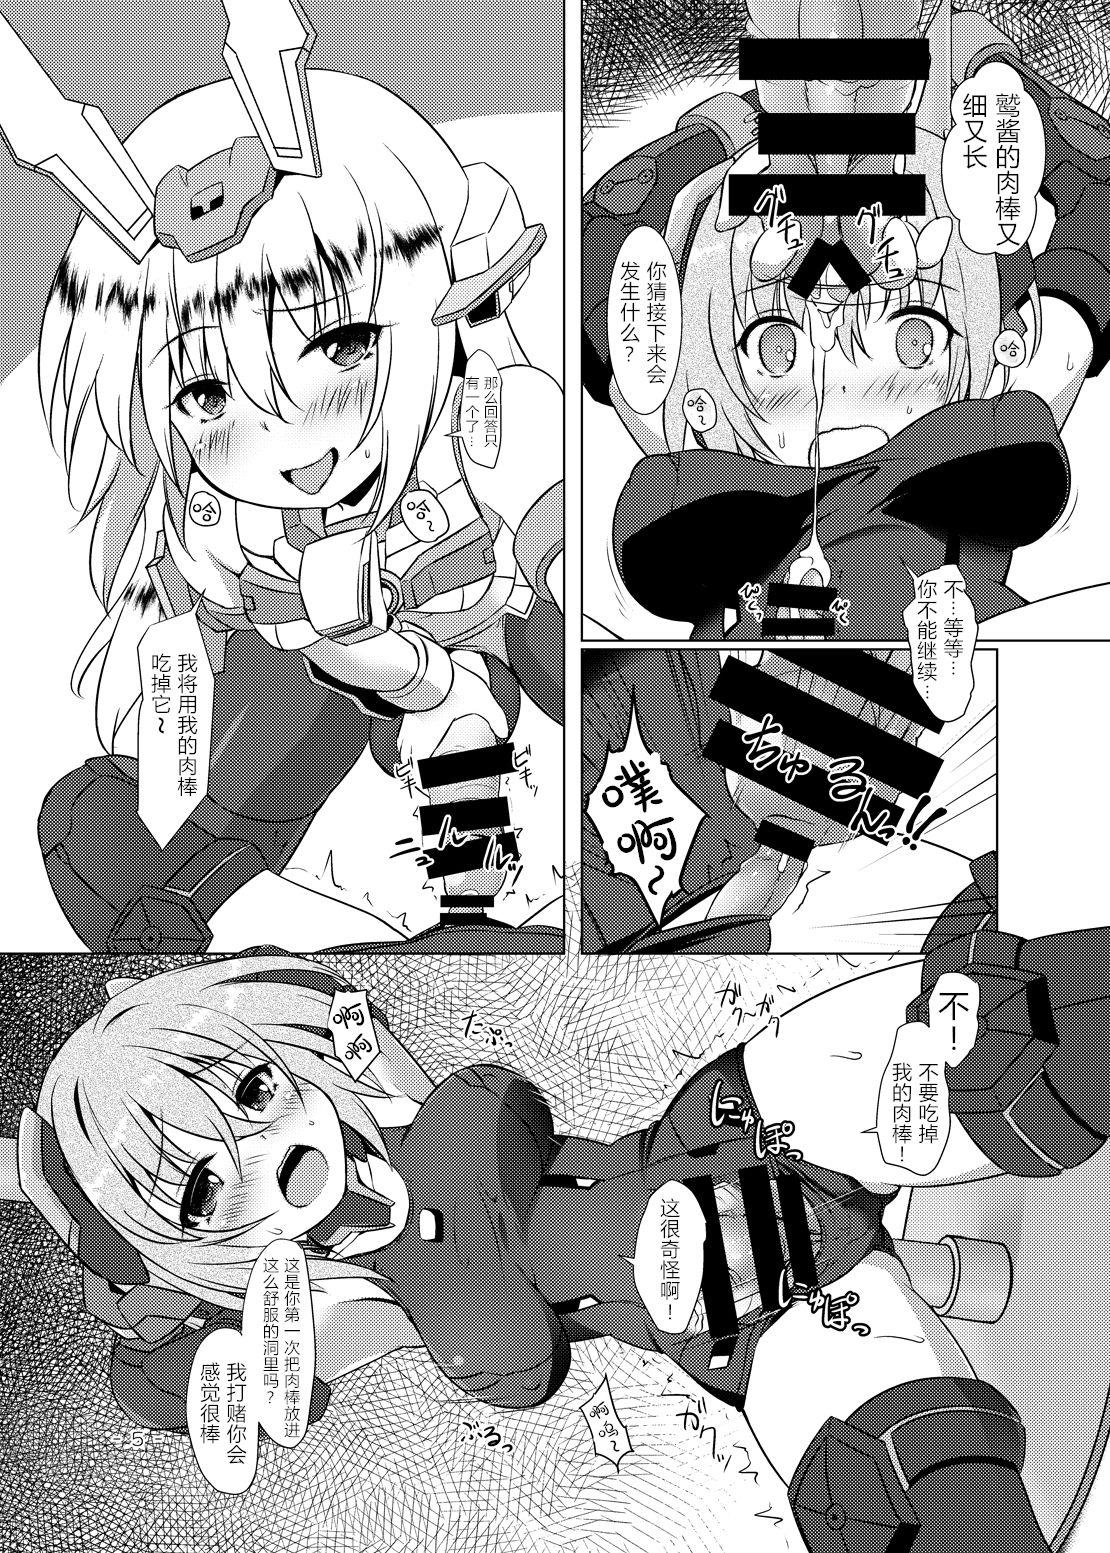 Chica BFAG 2 - Frame arms girl Realamateur - Page 6